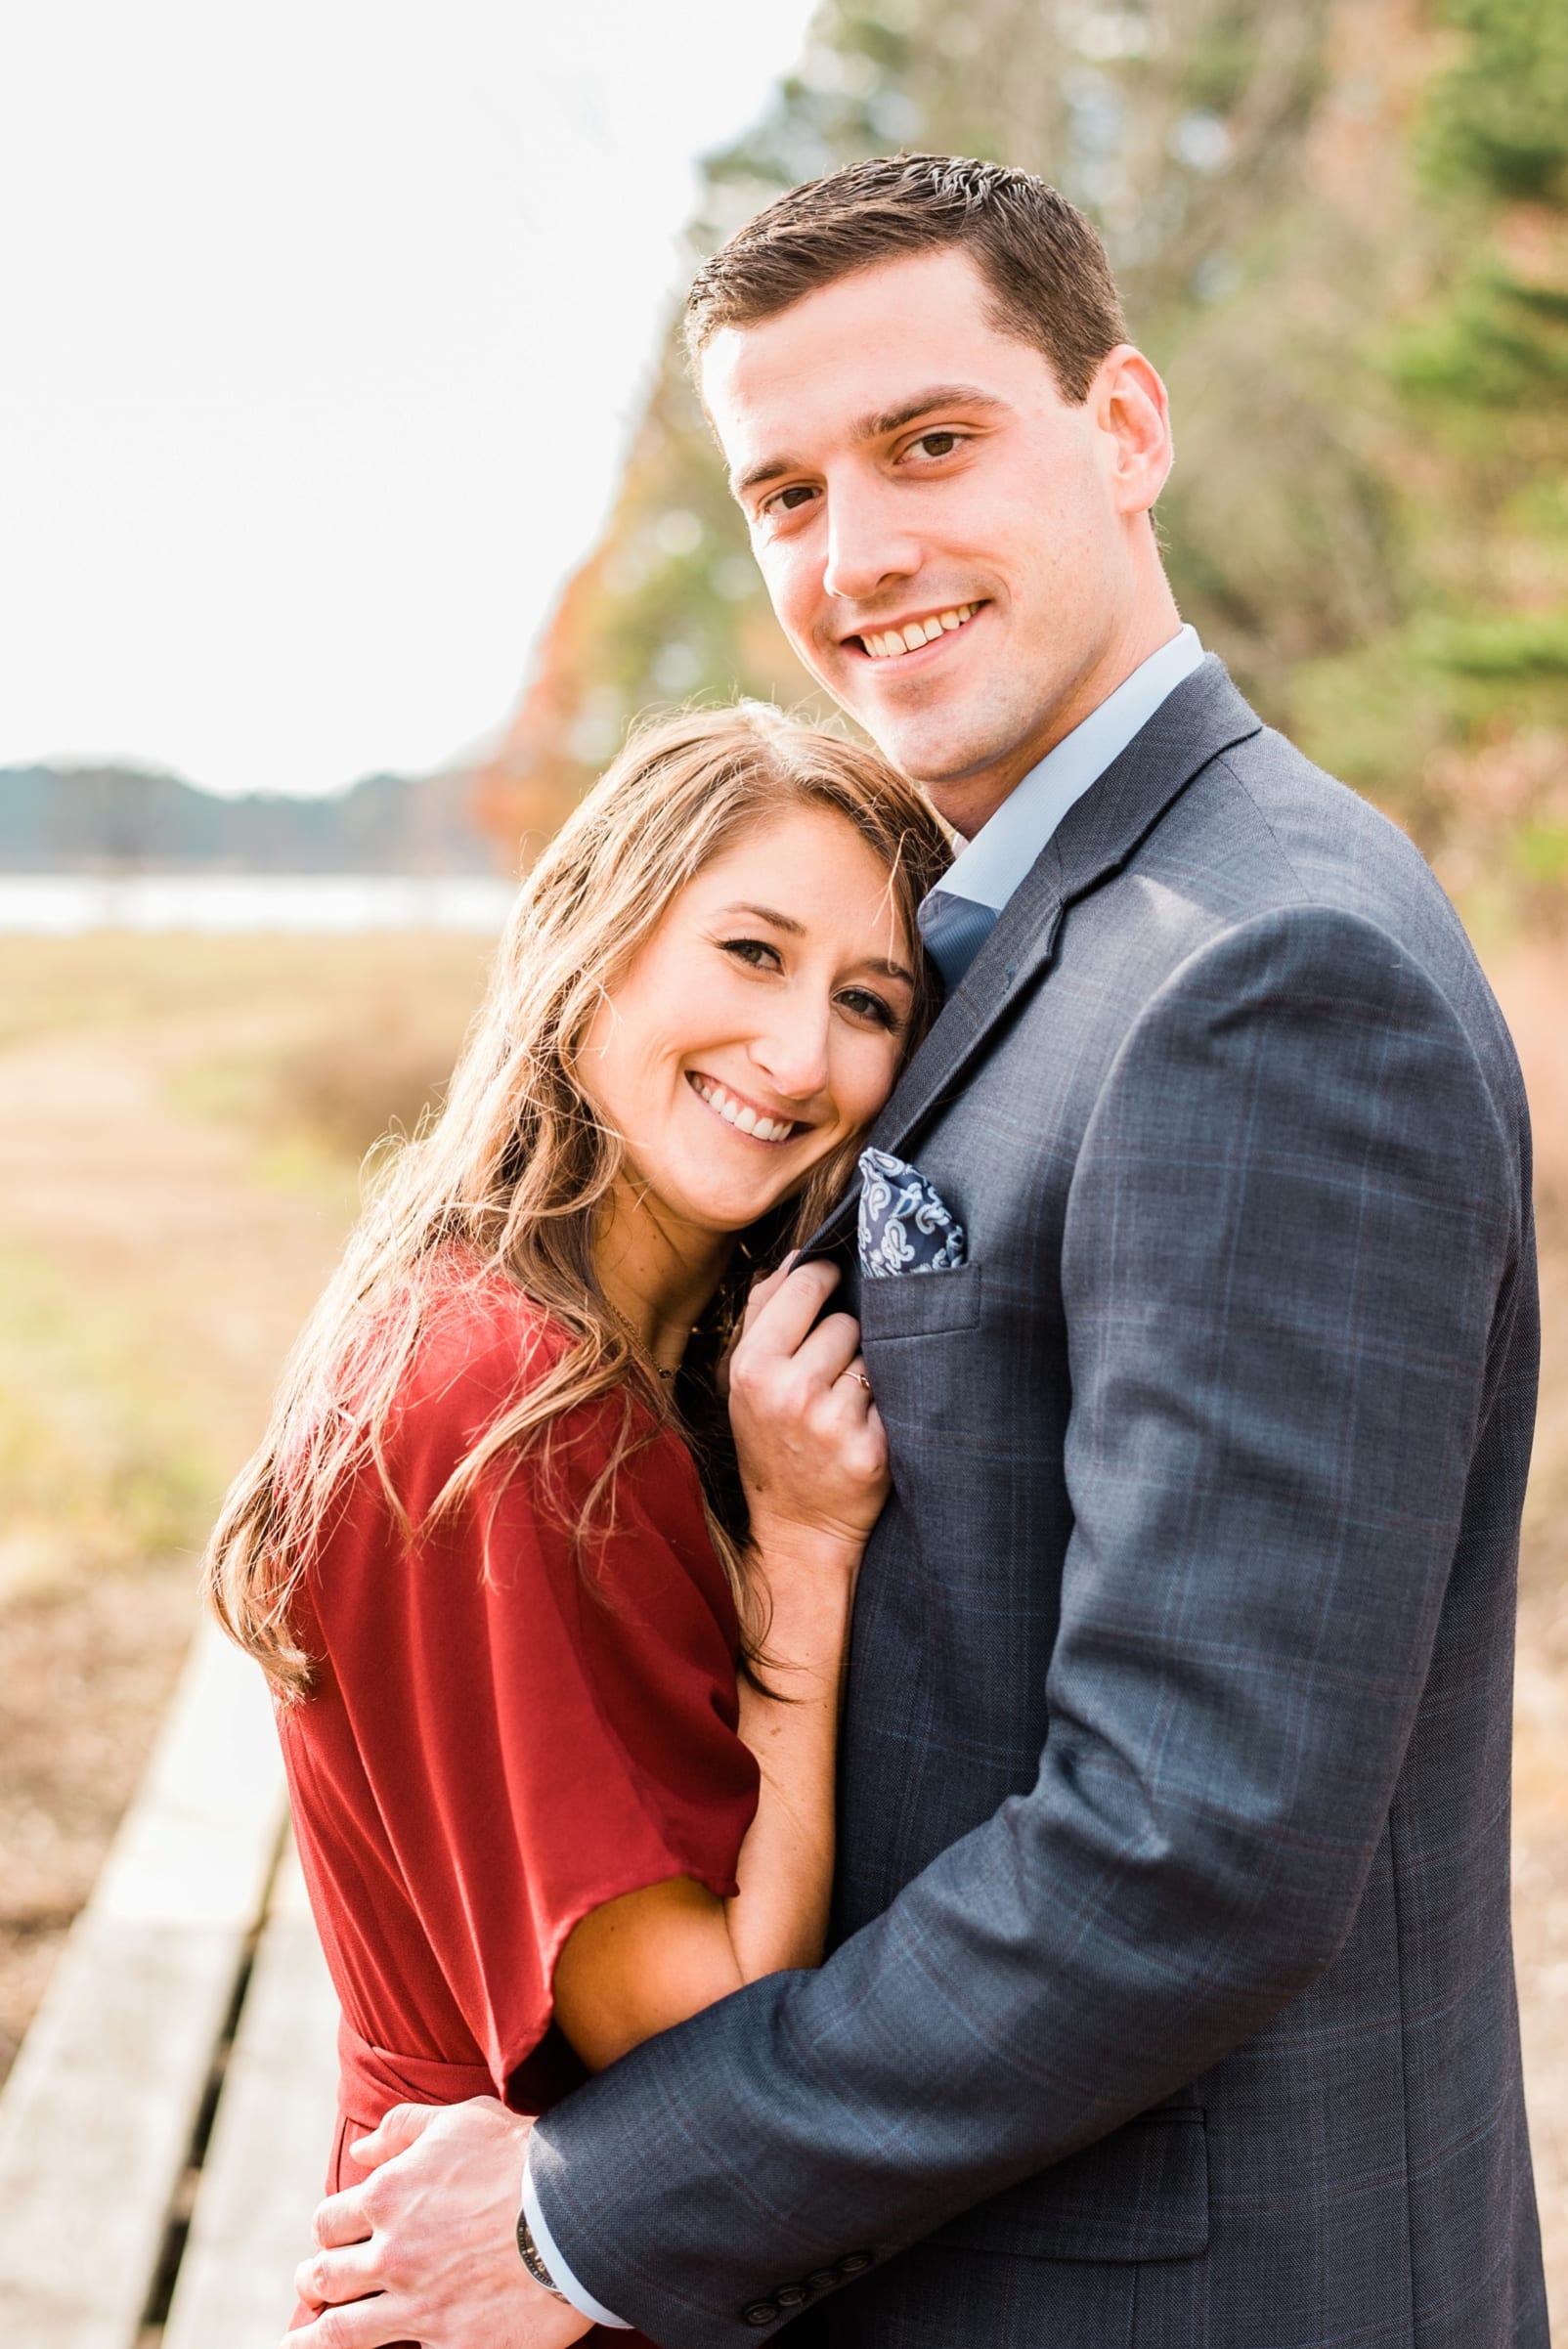 Raleigh engaged couple smiling together photo